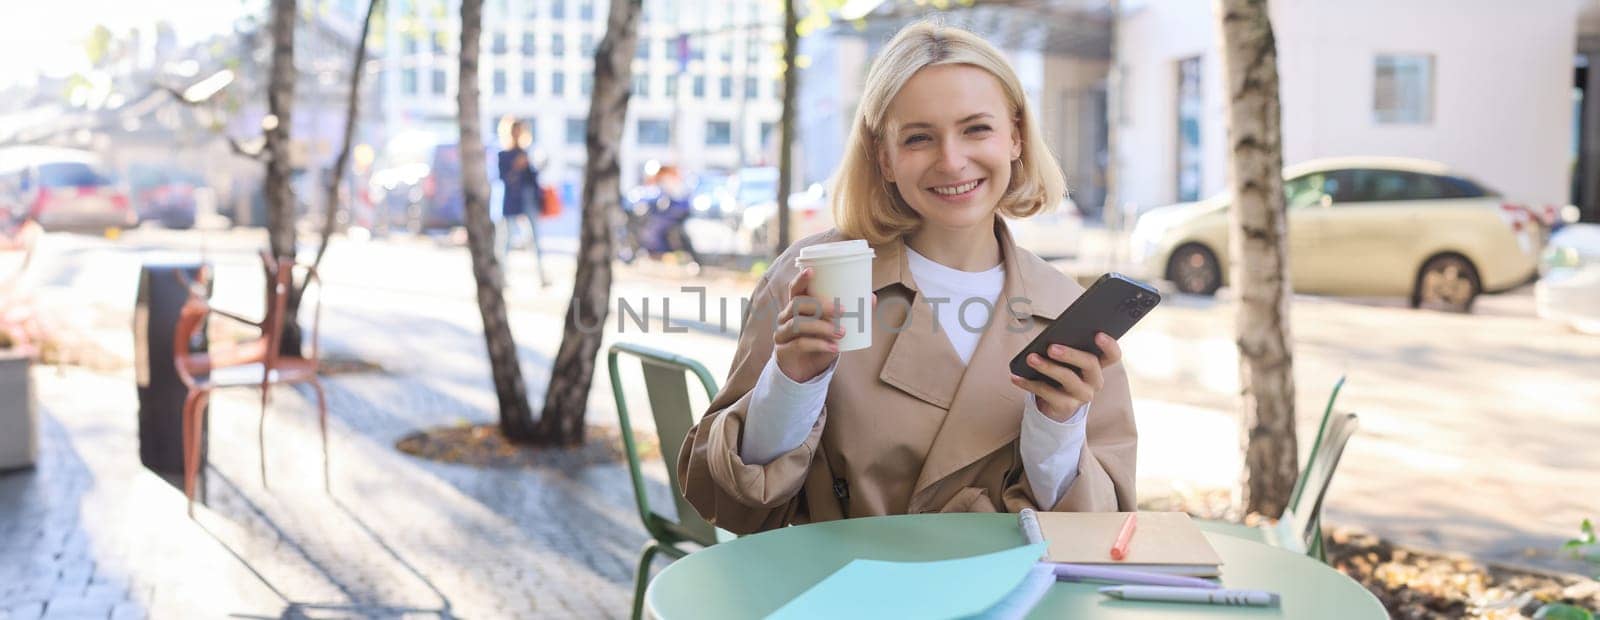 Portrait of blond smiling woman sitting in cafe, enjoying cup of takeaway coffee, using mobile phone, working on smartphone, social media blogger making post online.